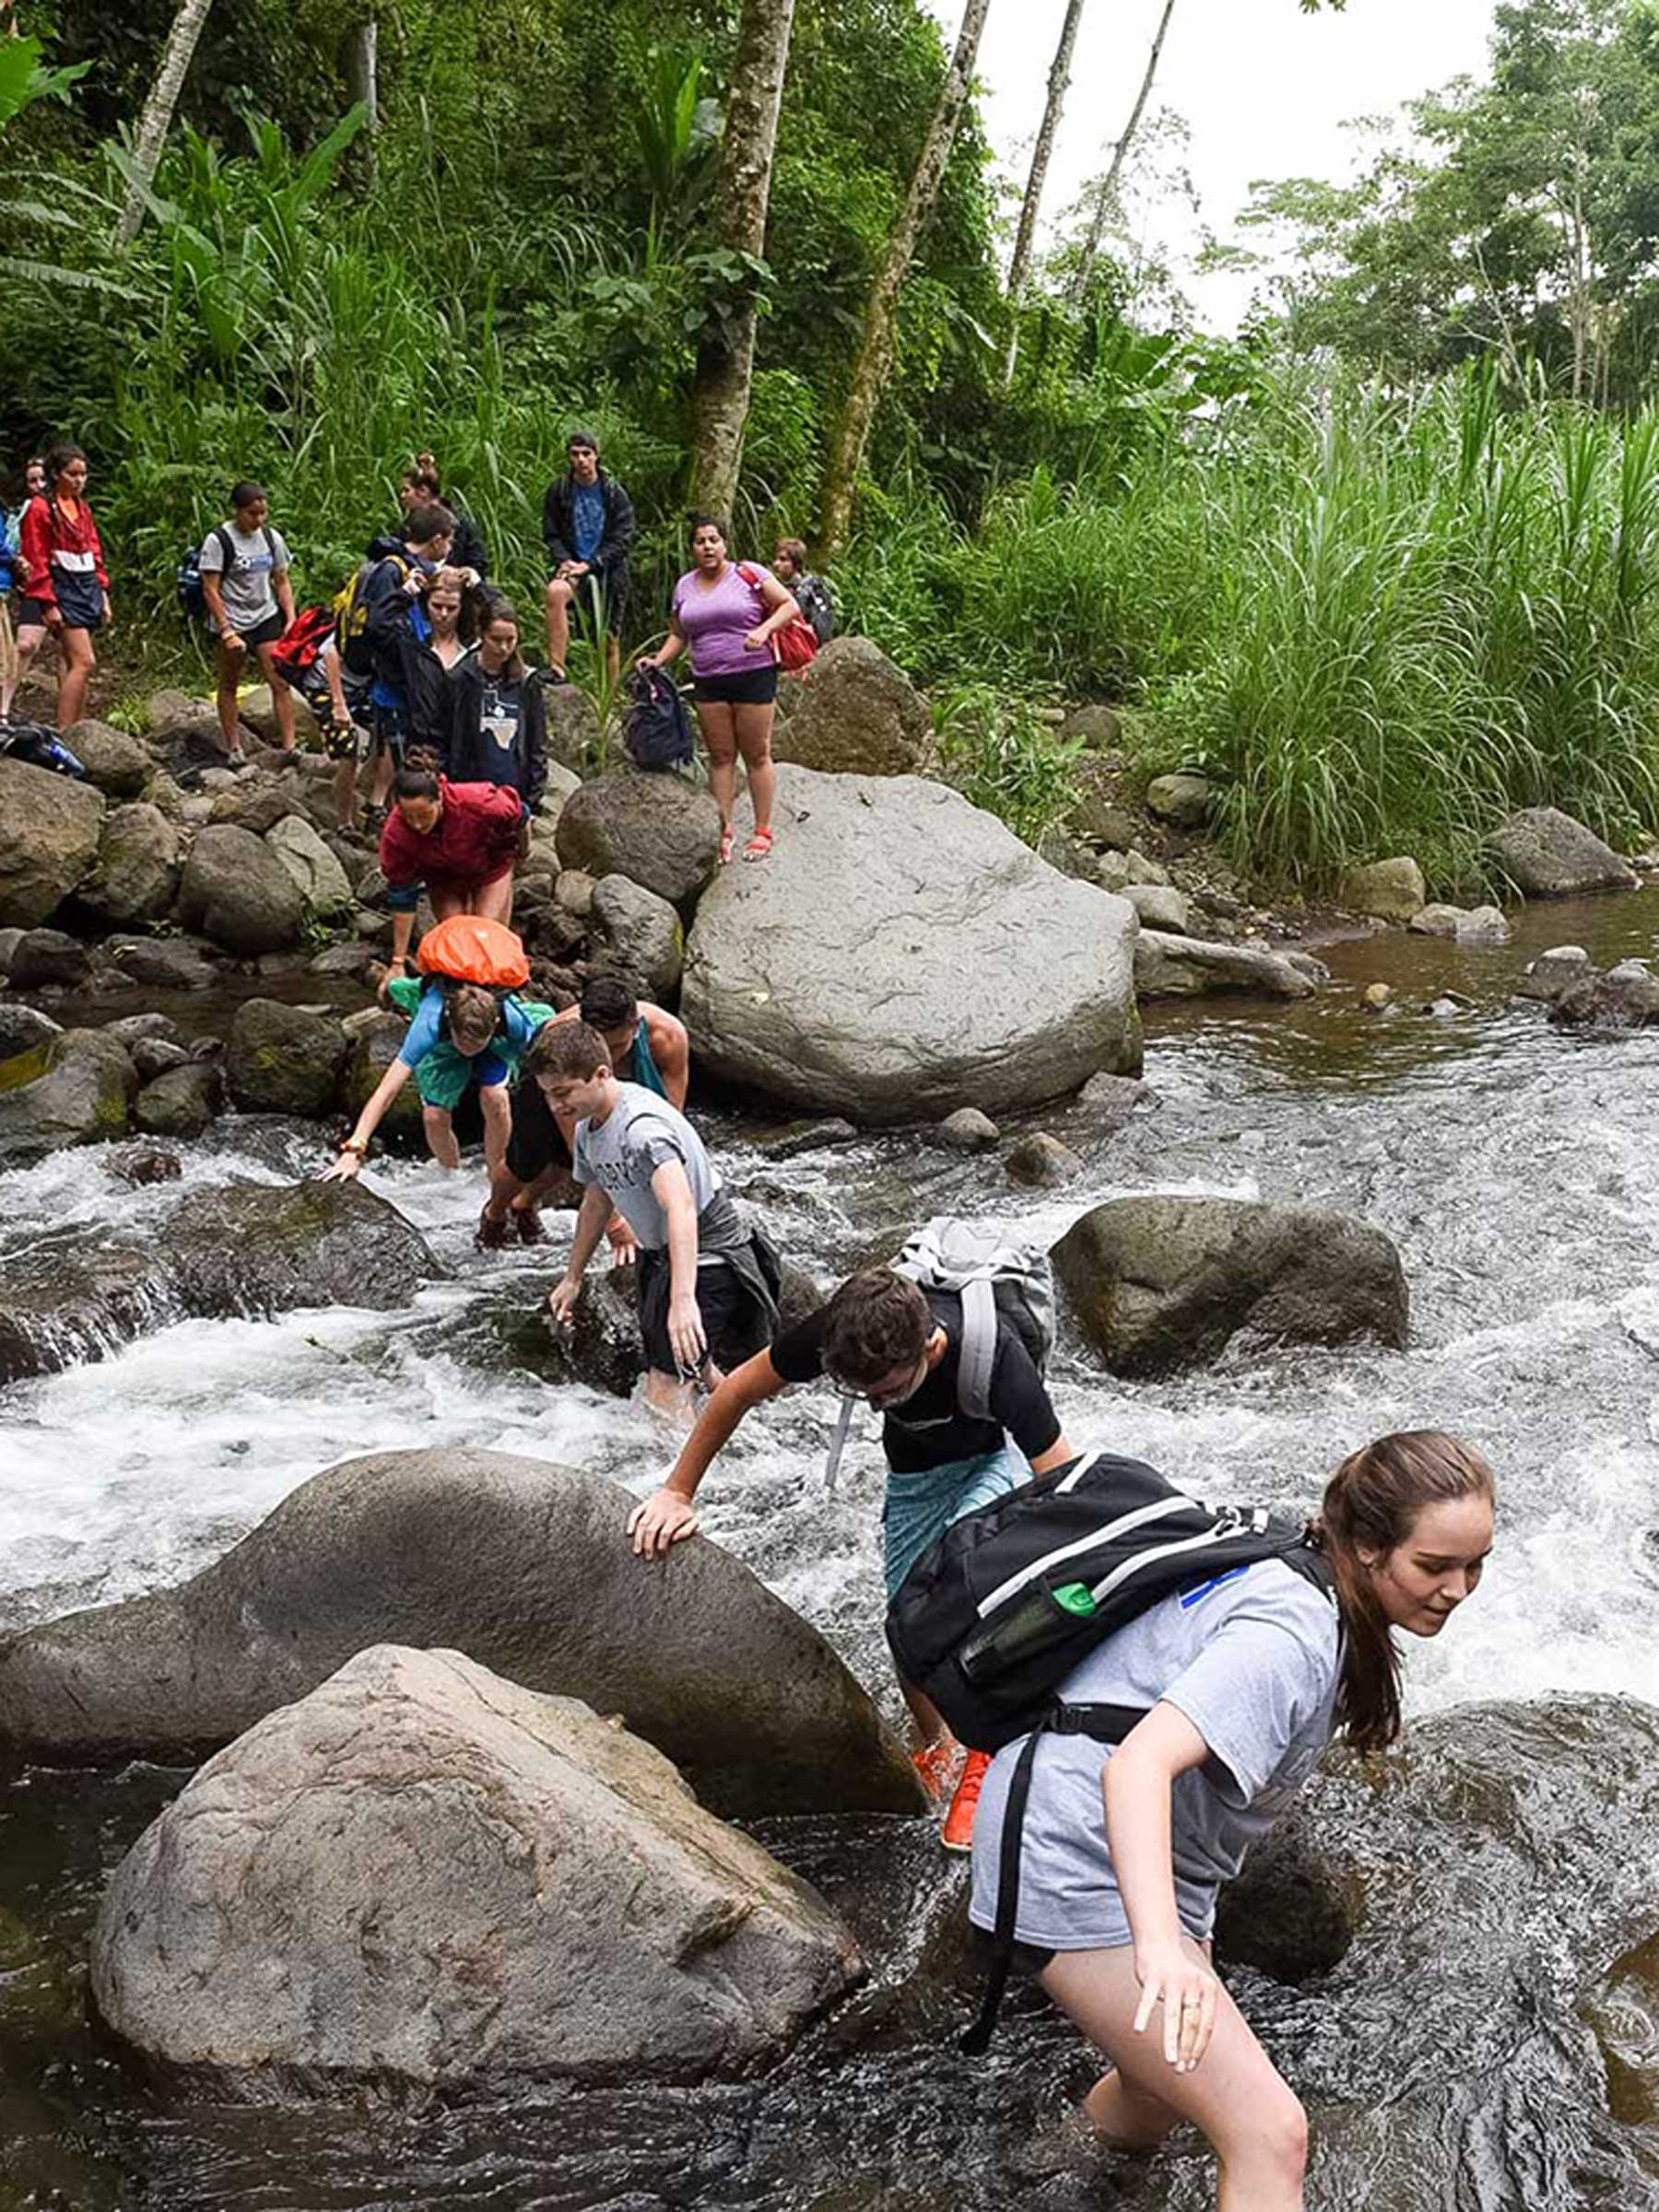 Photo: Verto Education students wade across river together in tropical Costa Rica jungle